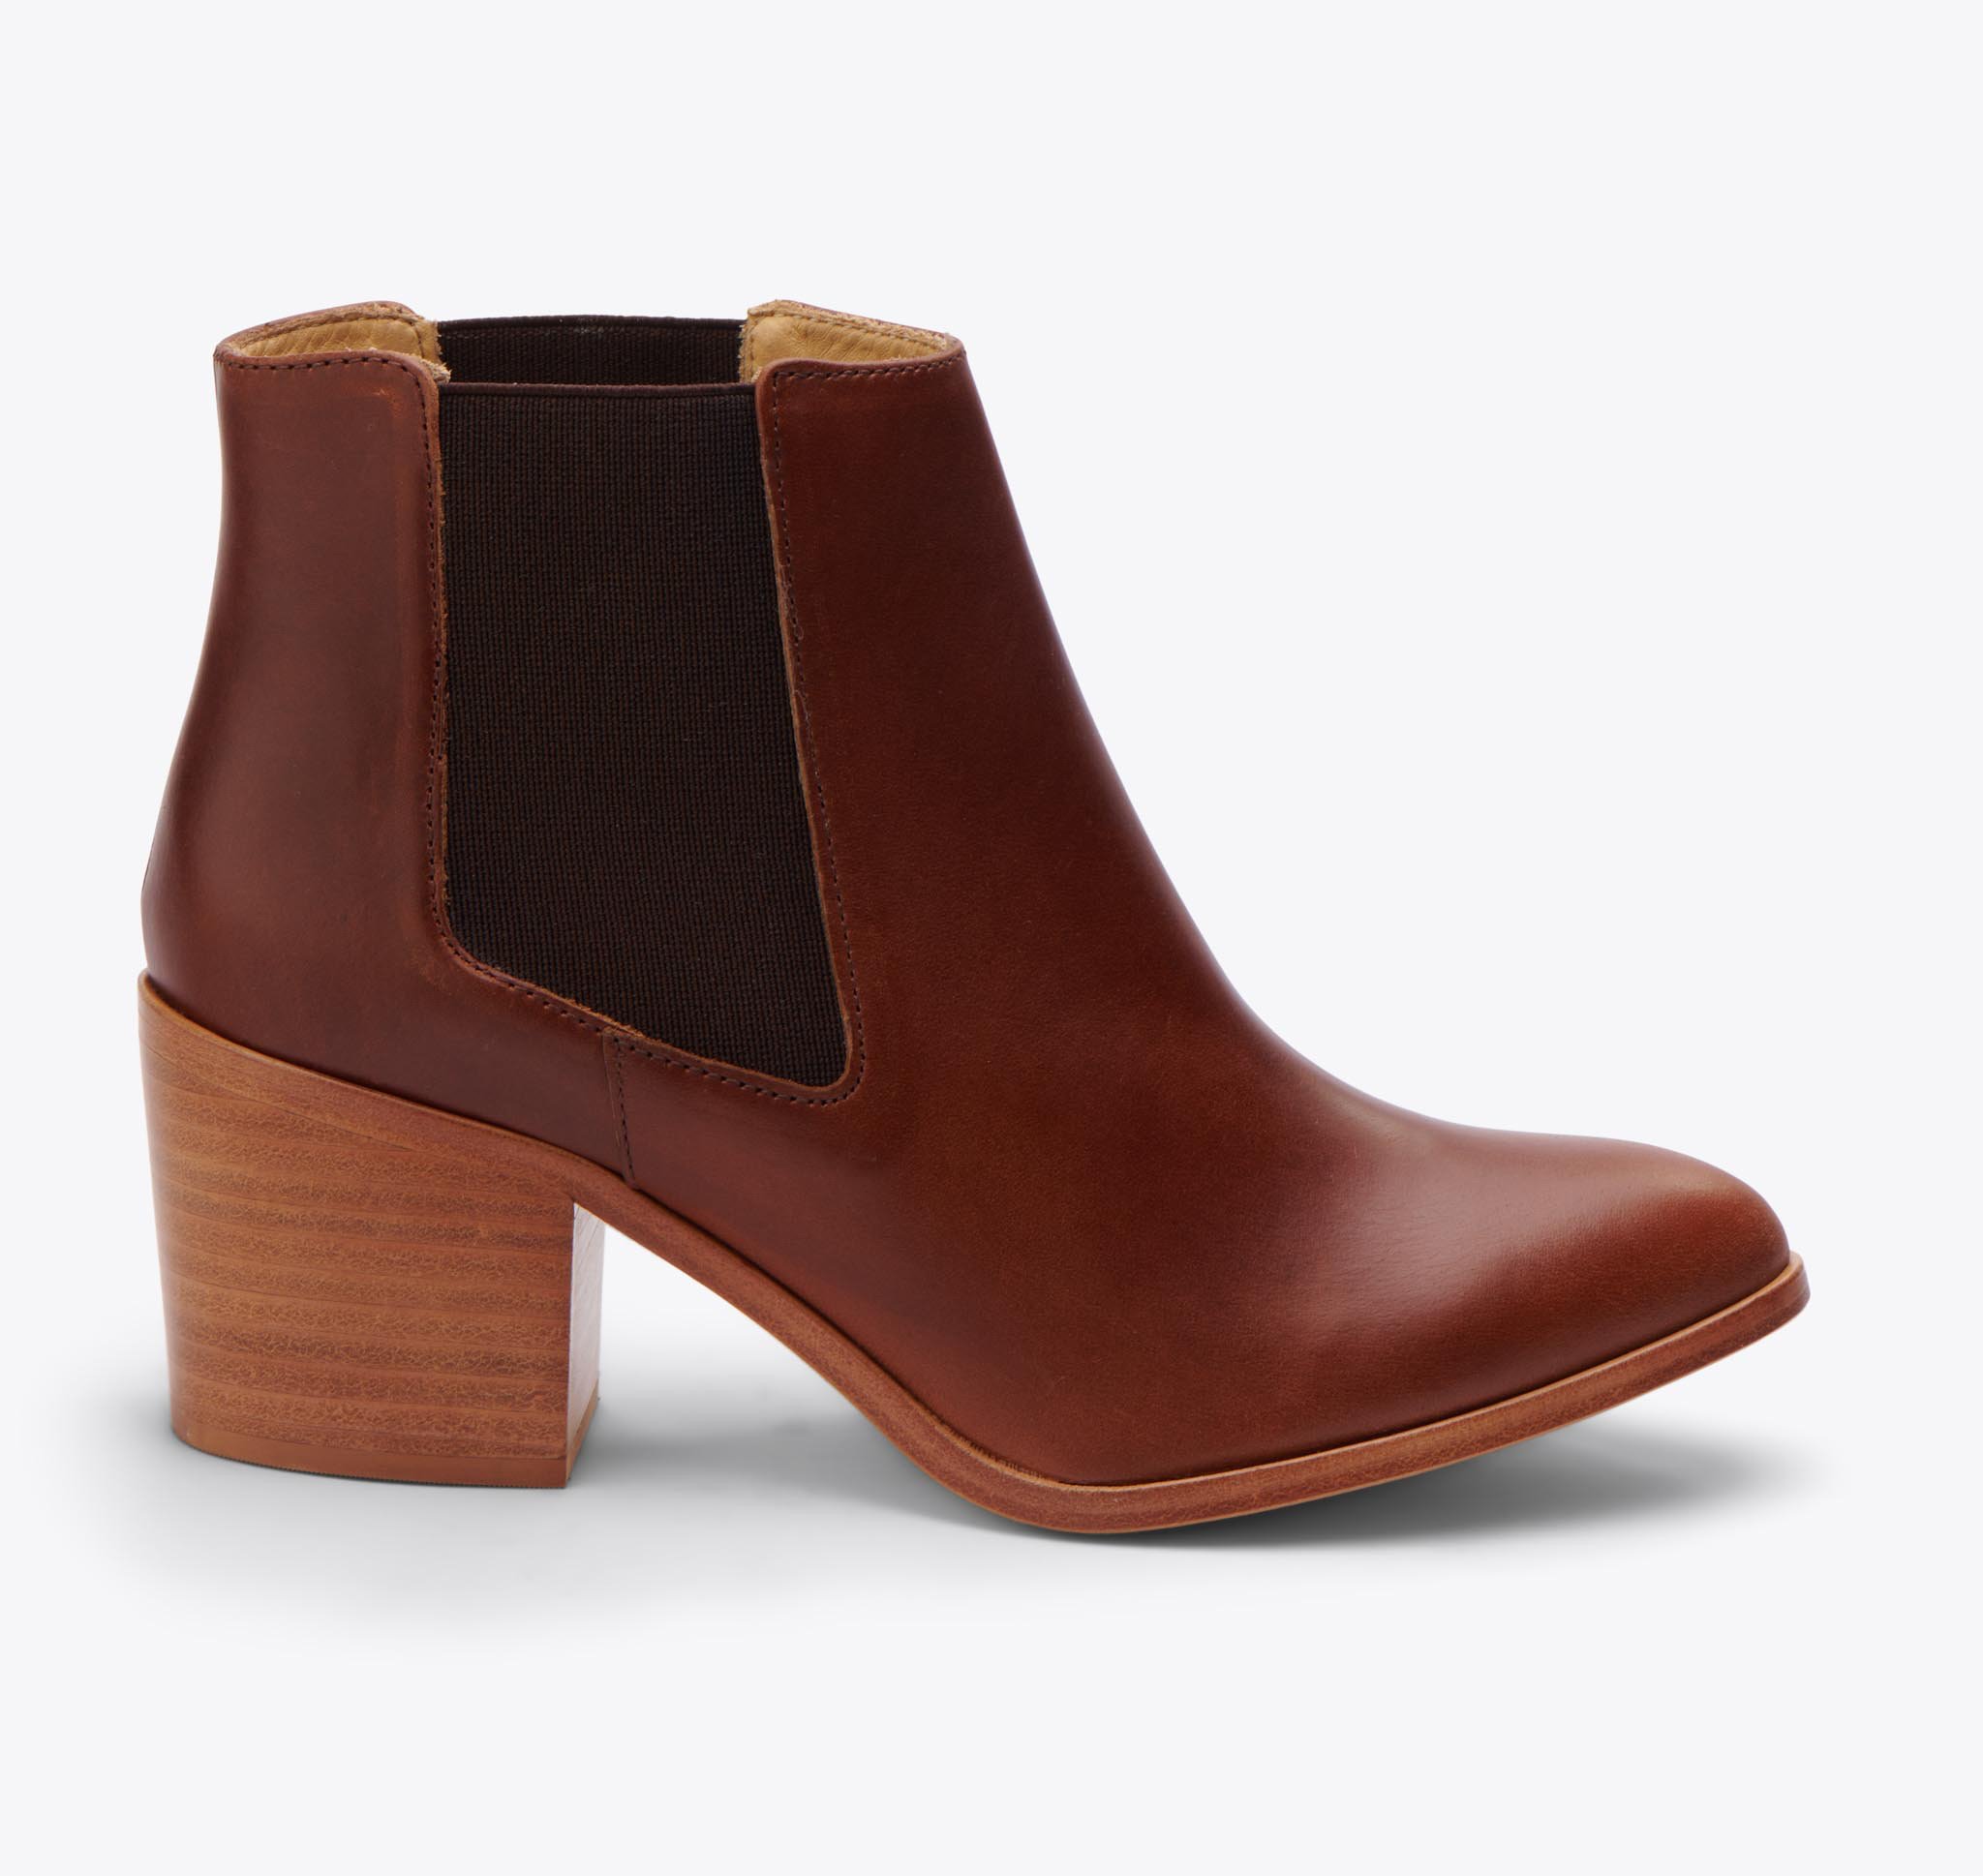 Nisolo Heeled Chelsea Boot Brandy - Every Nisolo product is built on the foundation of comfort, function, and design. 